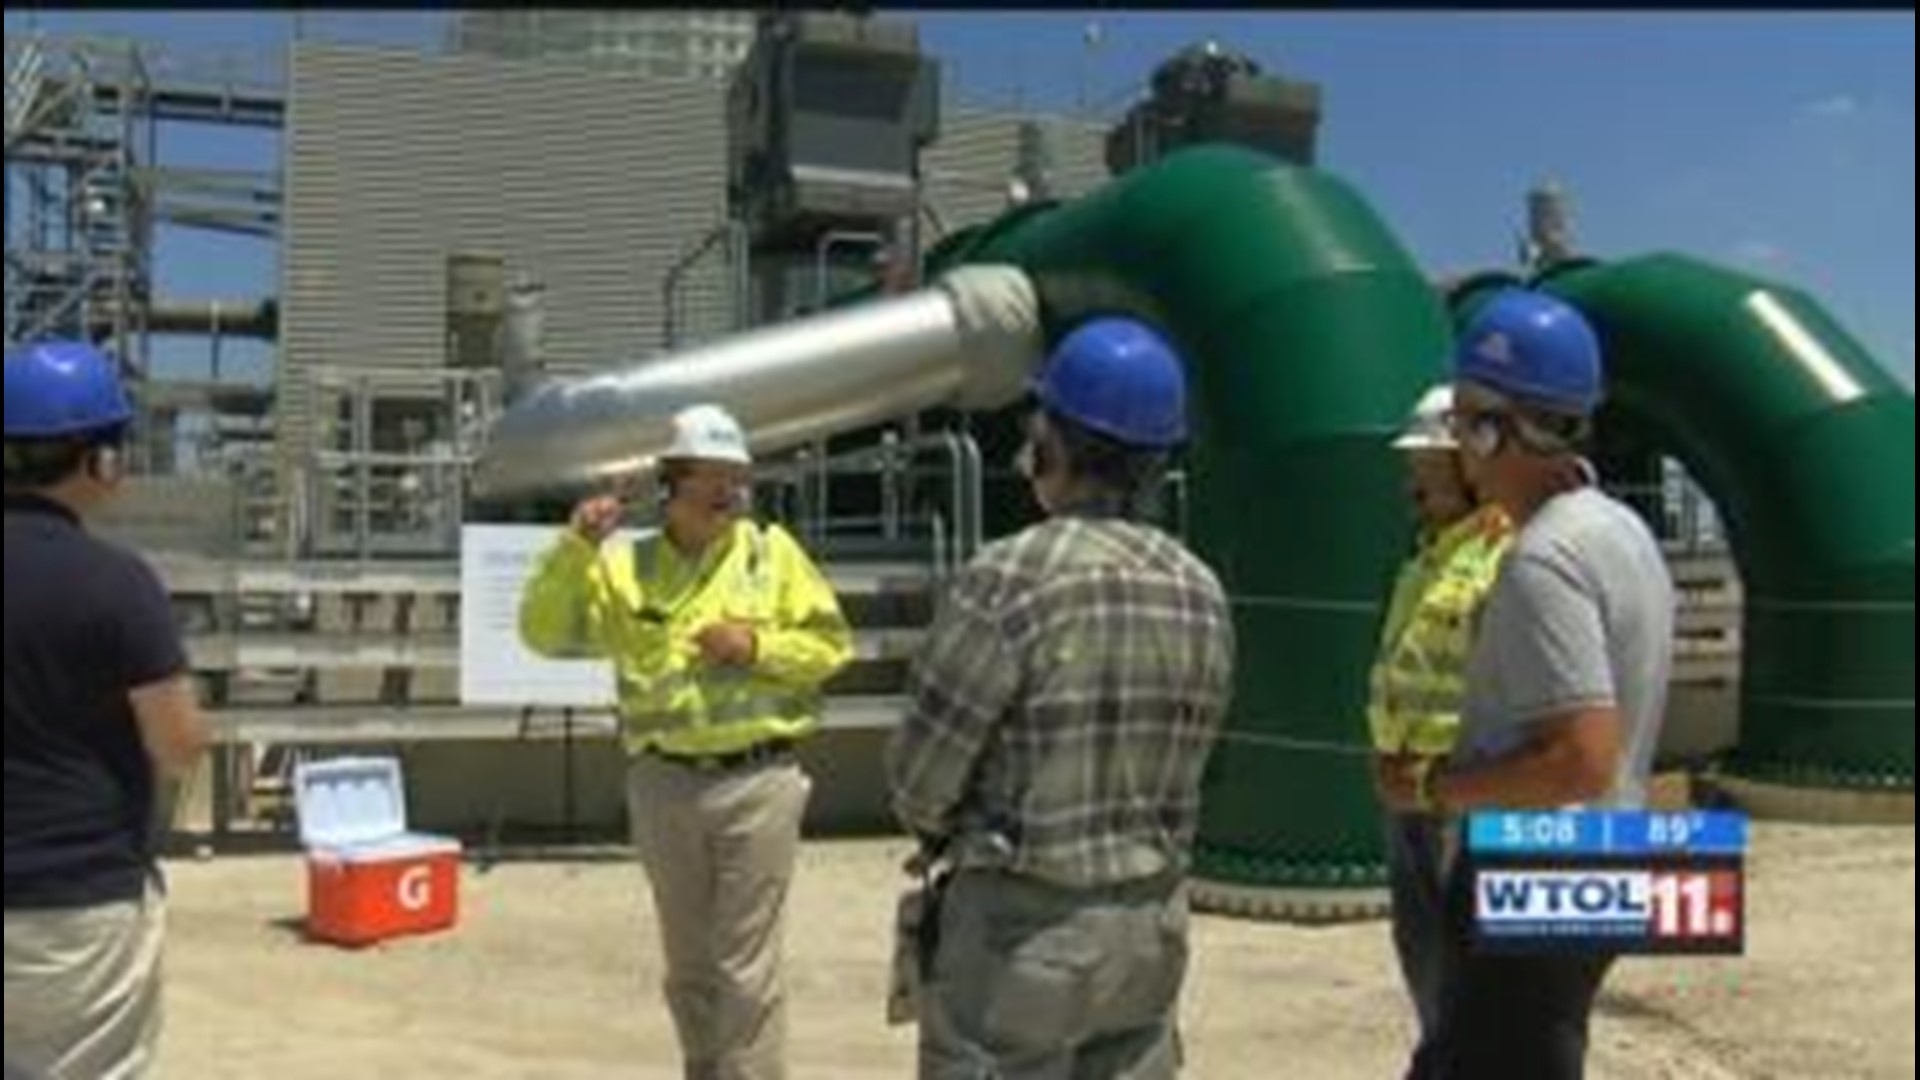 Teachers get hands-on experience in STEM subjects at Oregon Clean Energy Center